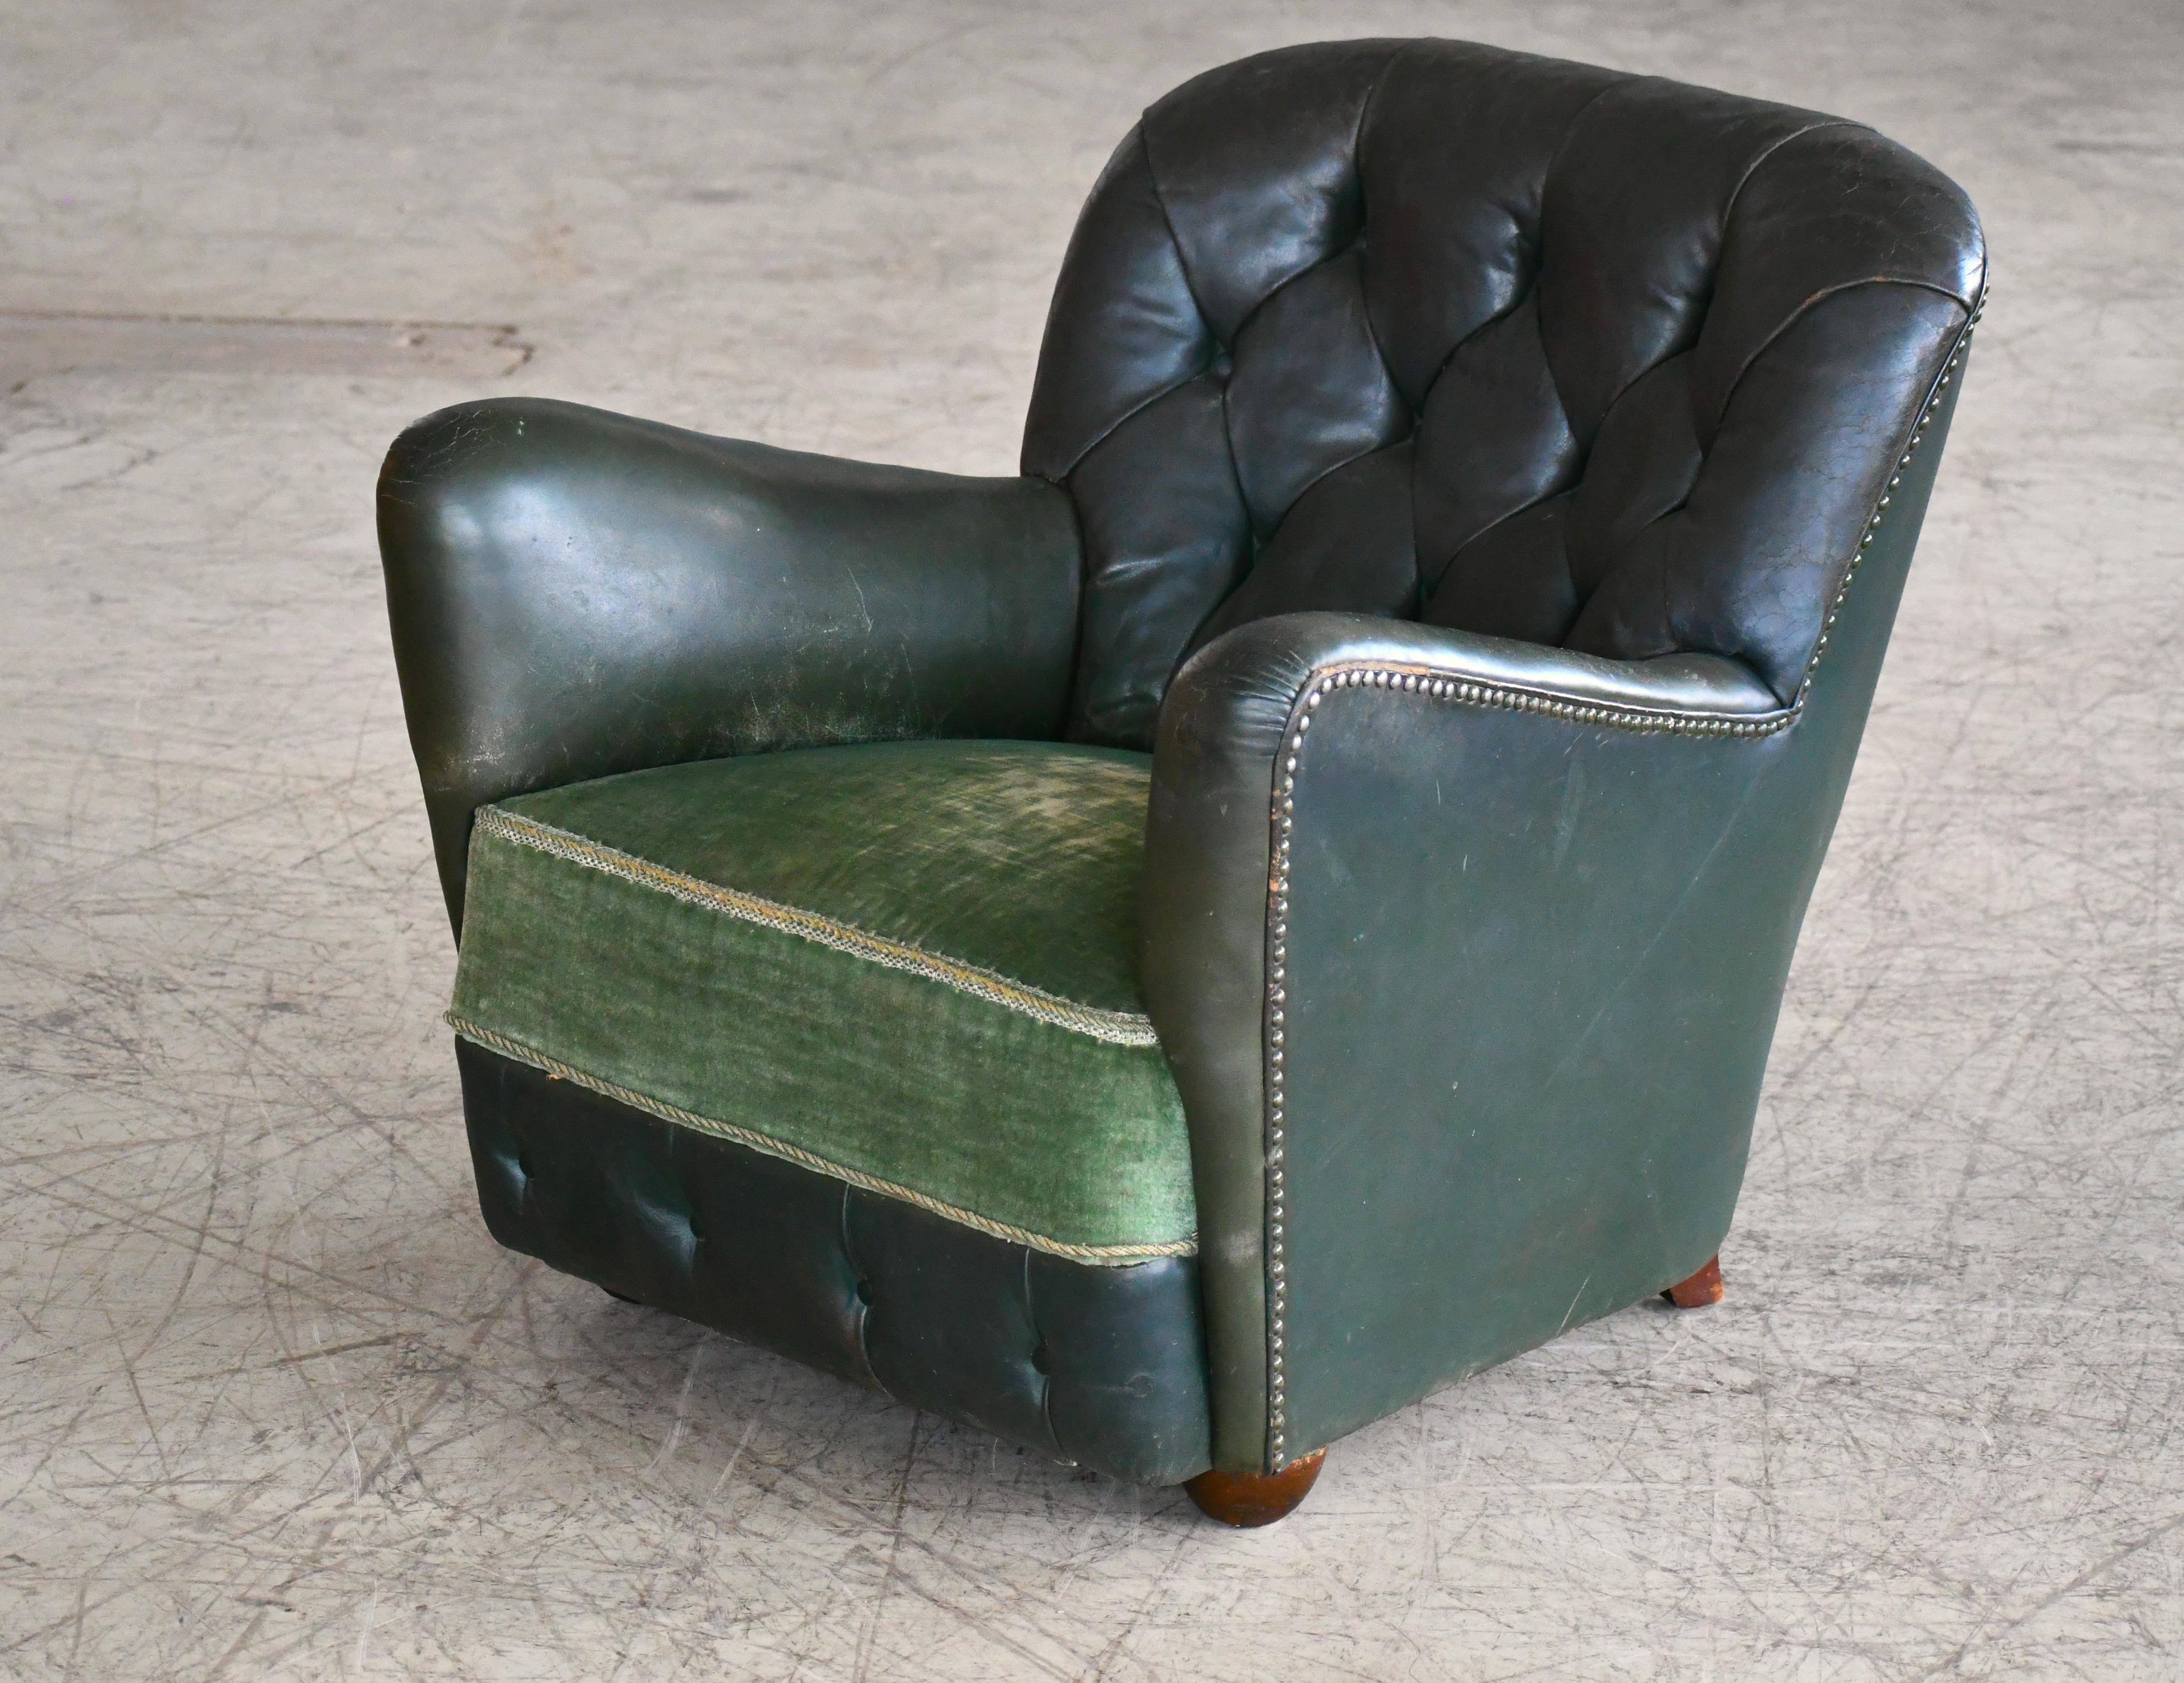 Very cool and rare 1940s lounge chair attributed to Master Furniture Maker Georg Kofoed of Copenhagen with the design attributed to Flemming Lassen. The stance and the overall design lines are very reminiscent of Lassen's iconic designs and the